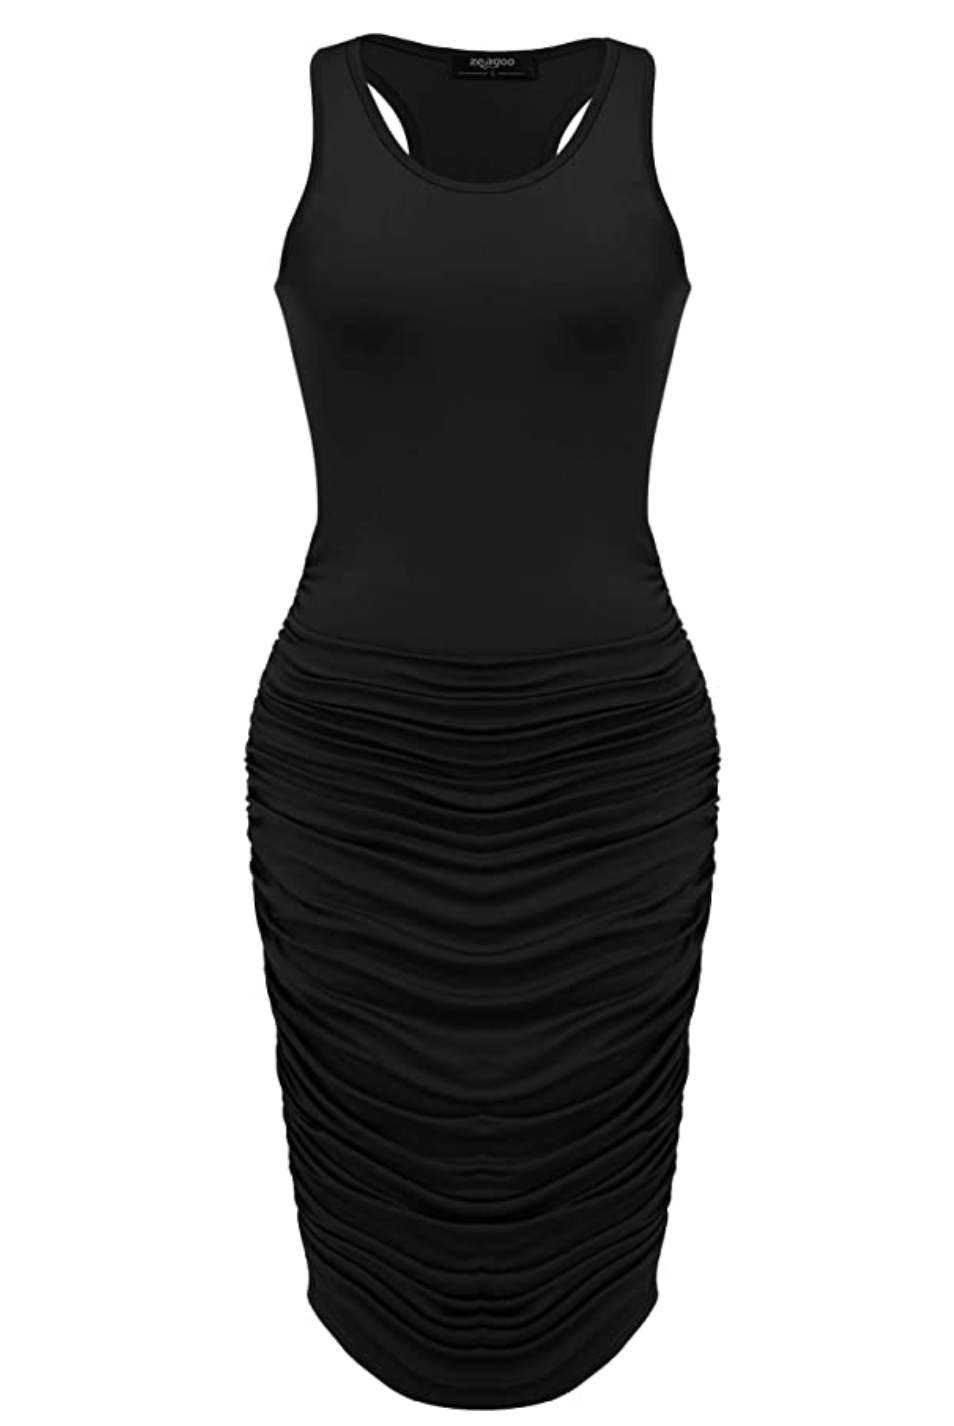 Zeagoo Ruched Bodycon Dress Can Smooth Out Your Figure | UsWeekly